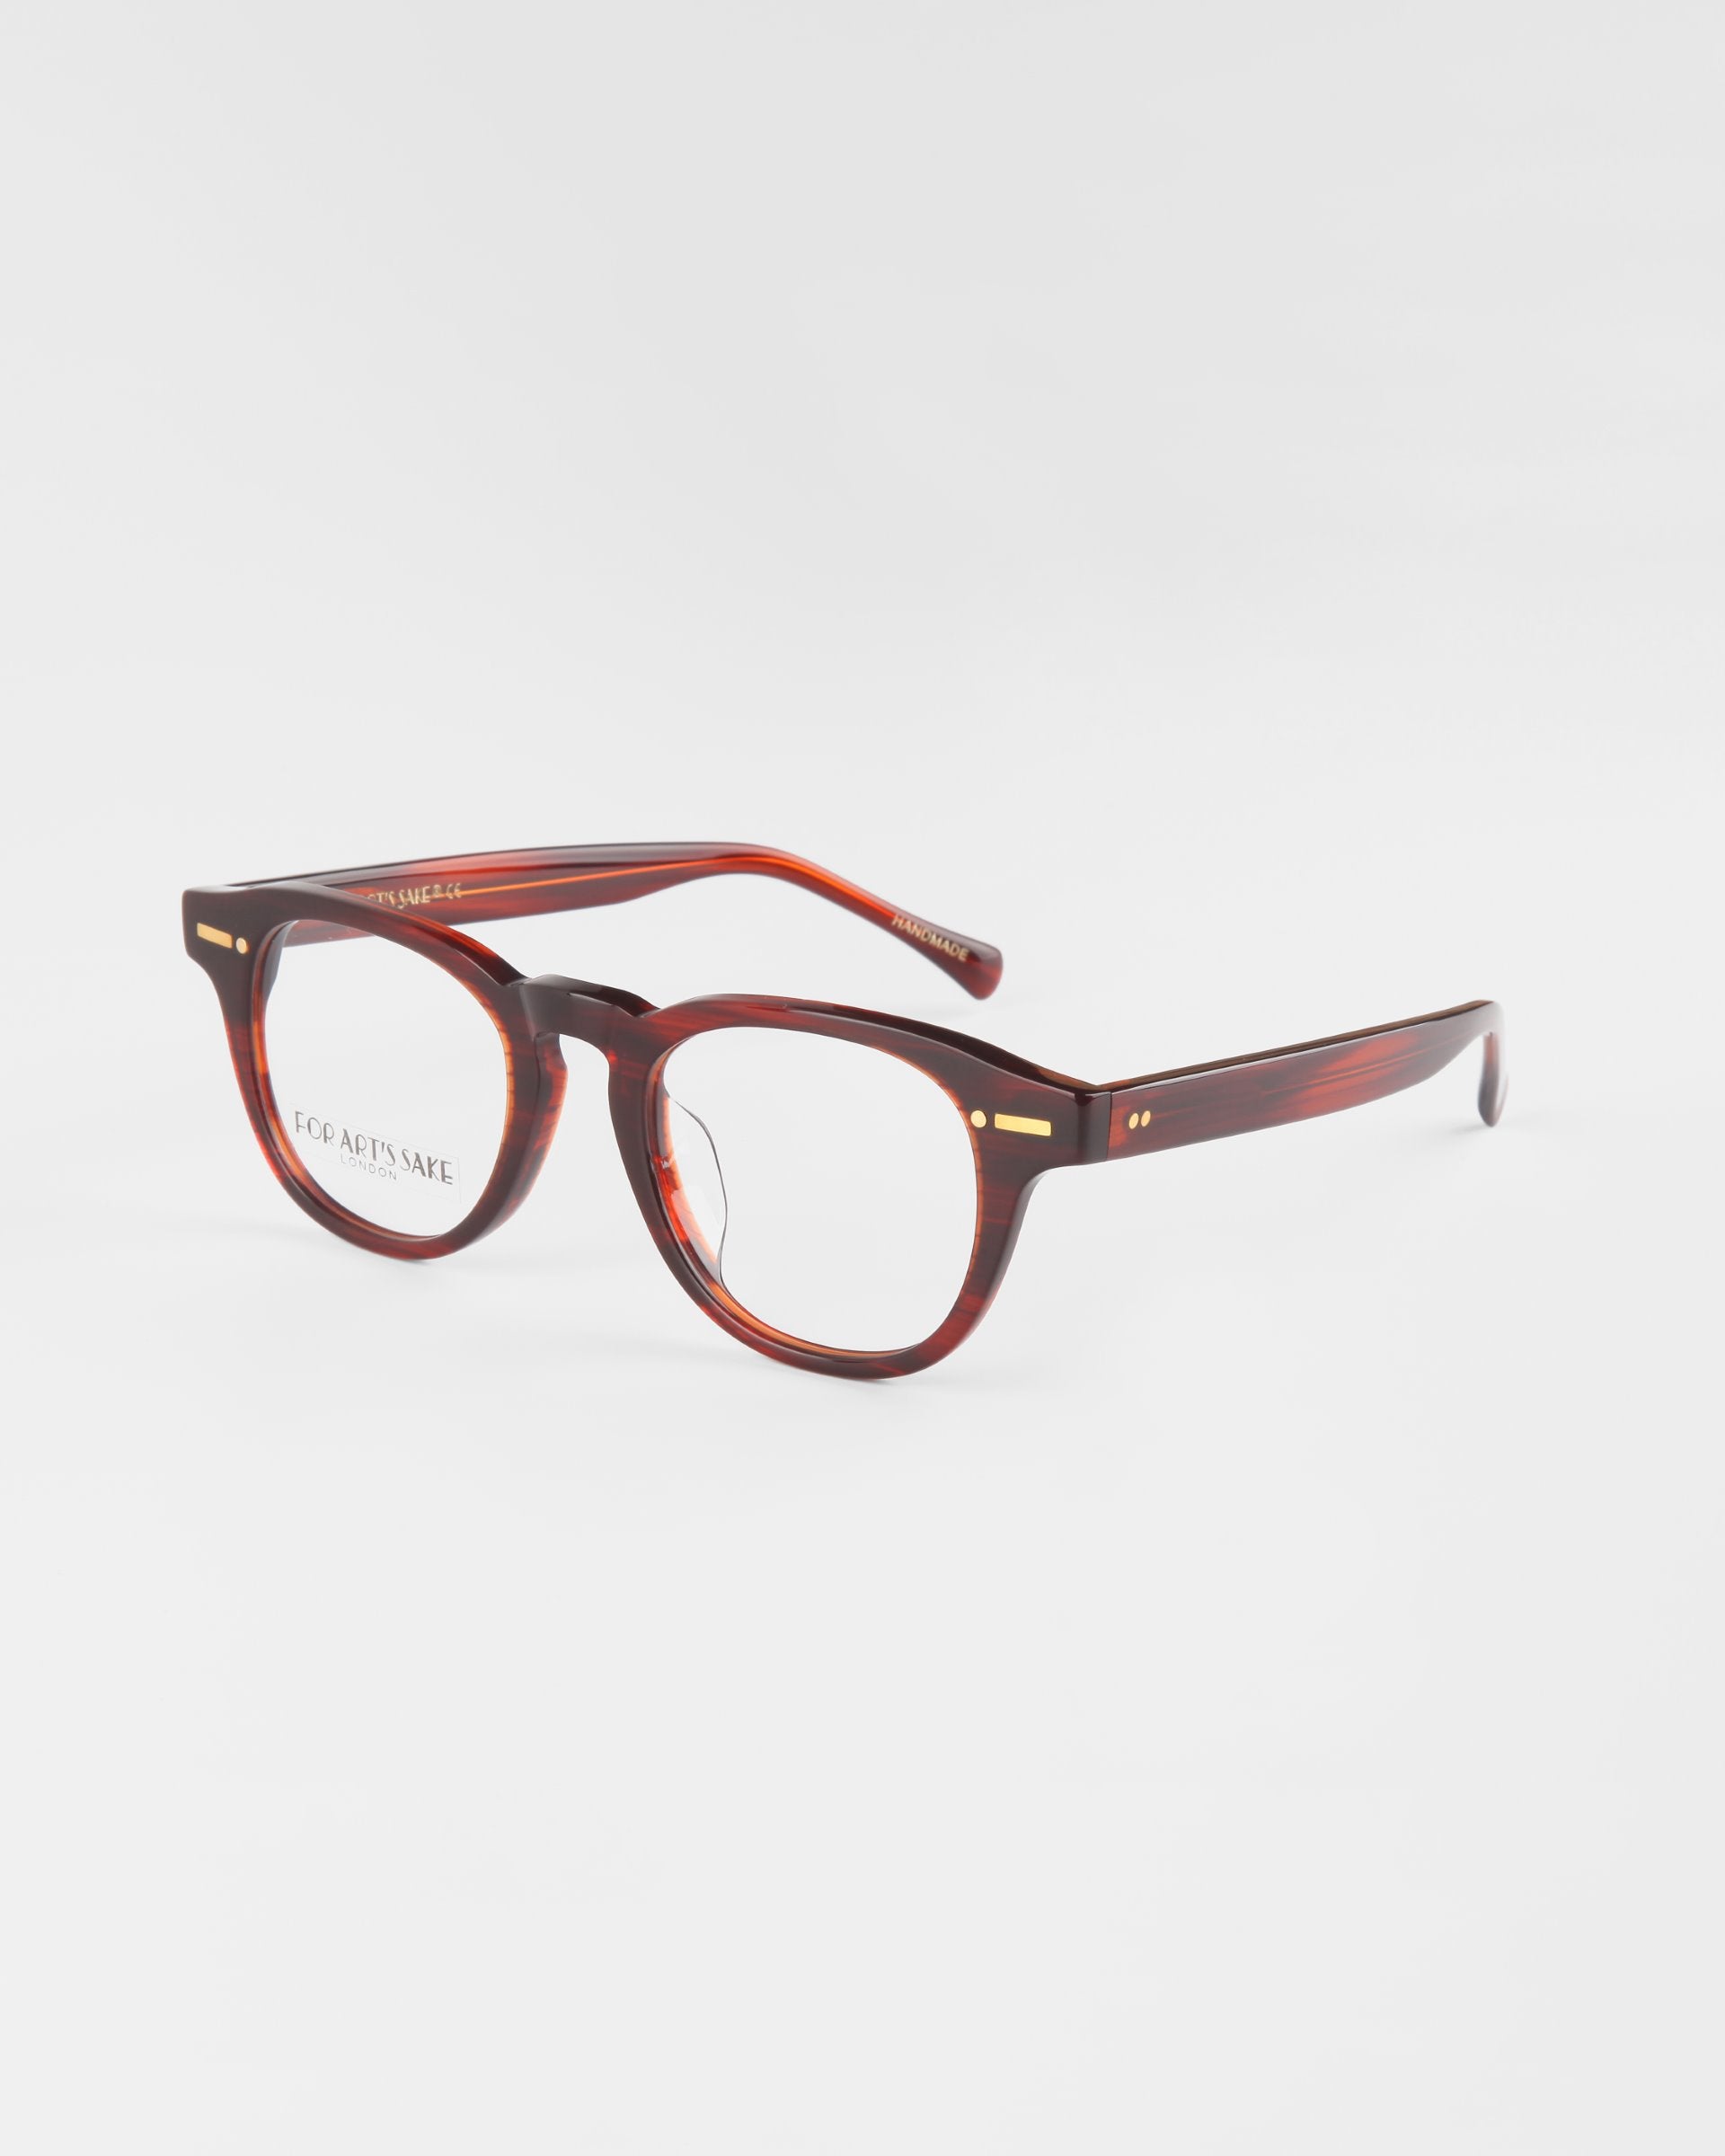 A pair of Rocky Brown eyeglasses by For Art's Sake® with round lenses and a sturdy bridge. The frames have gold accents near the hinges and a sleek, glossy finish. Featuring UV protection, the temple arms are thick and taper slightly towards the ear tips. Background is white.